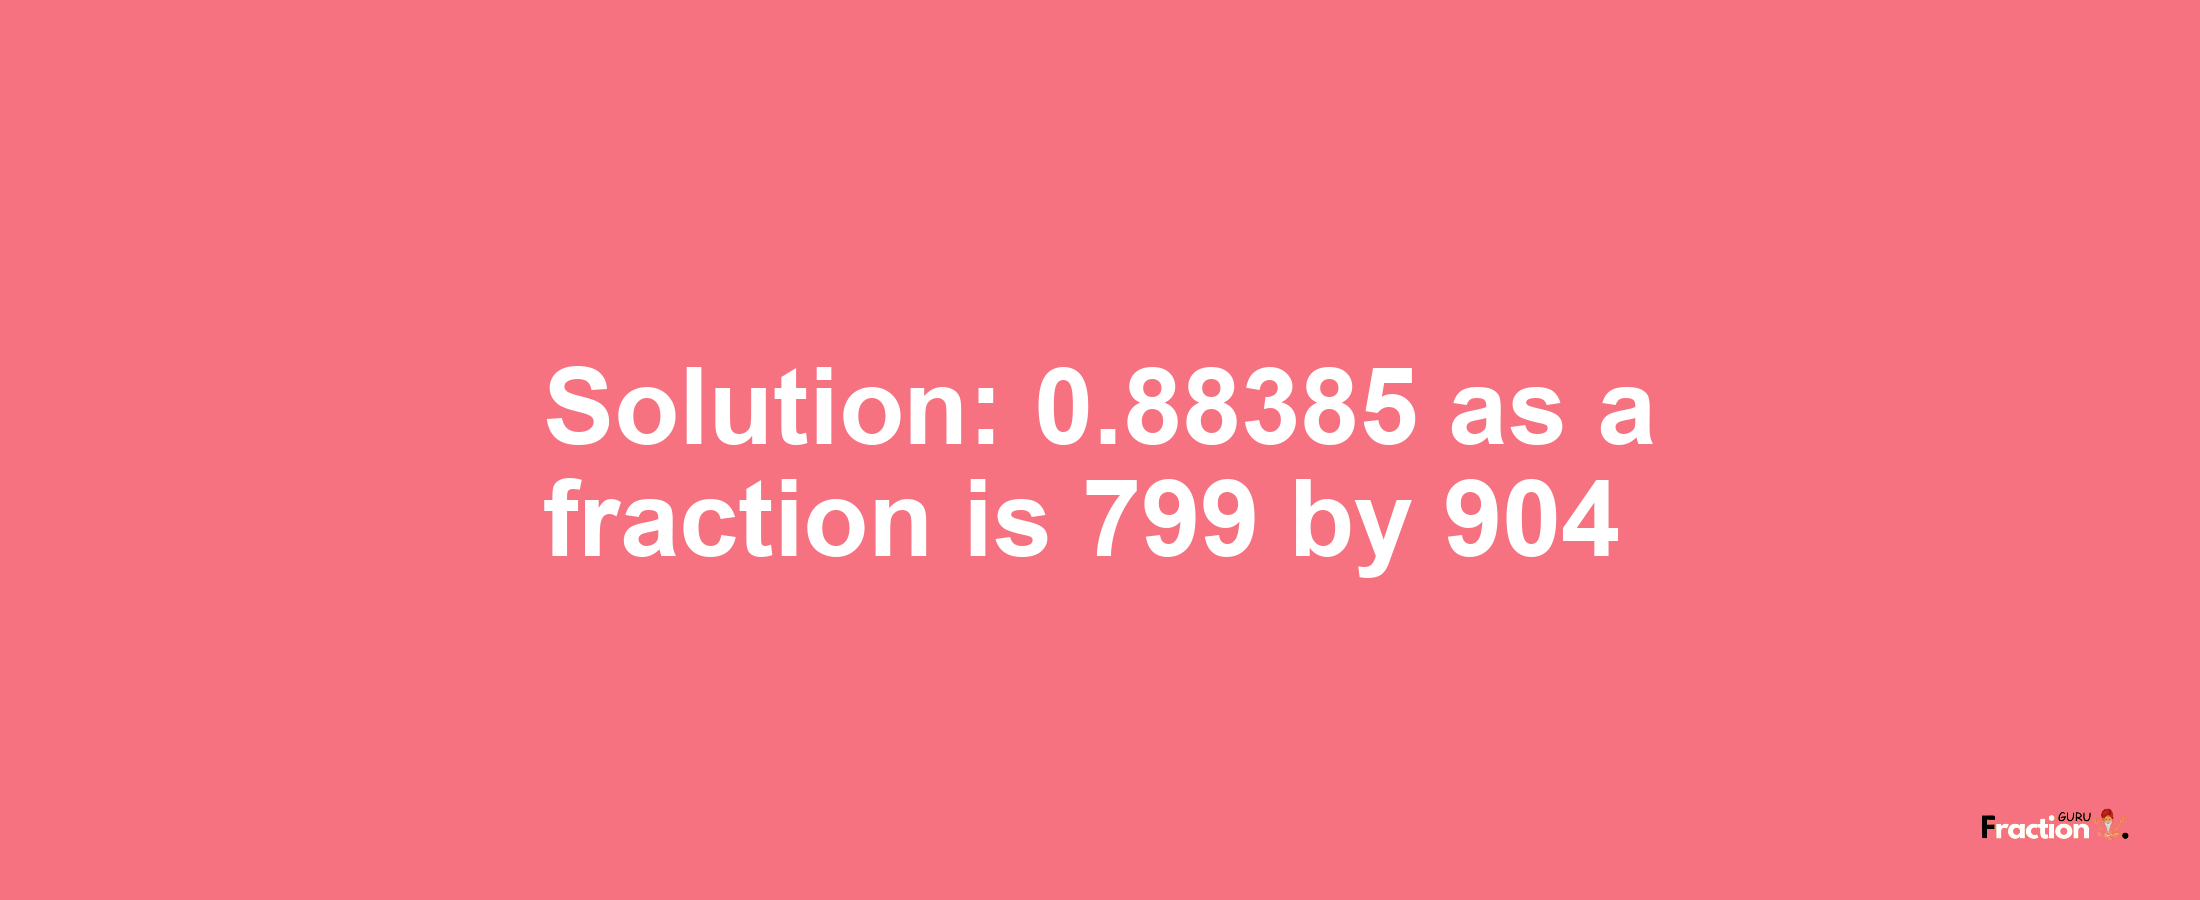 Solution:0.88385 as a fraction is 799/904